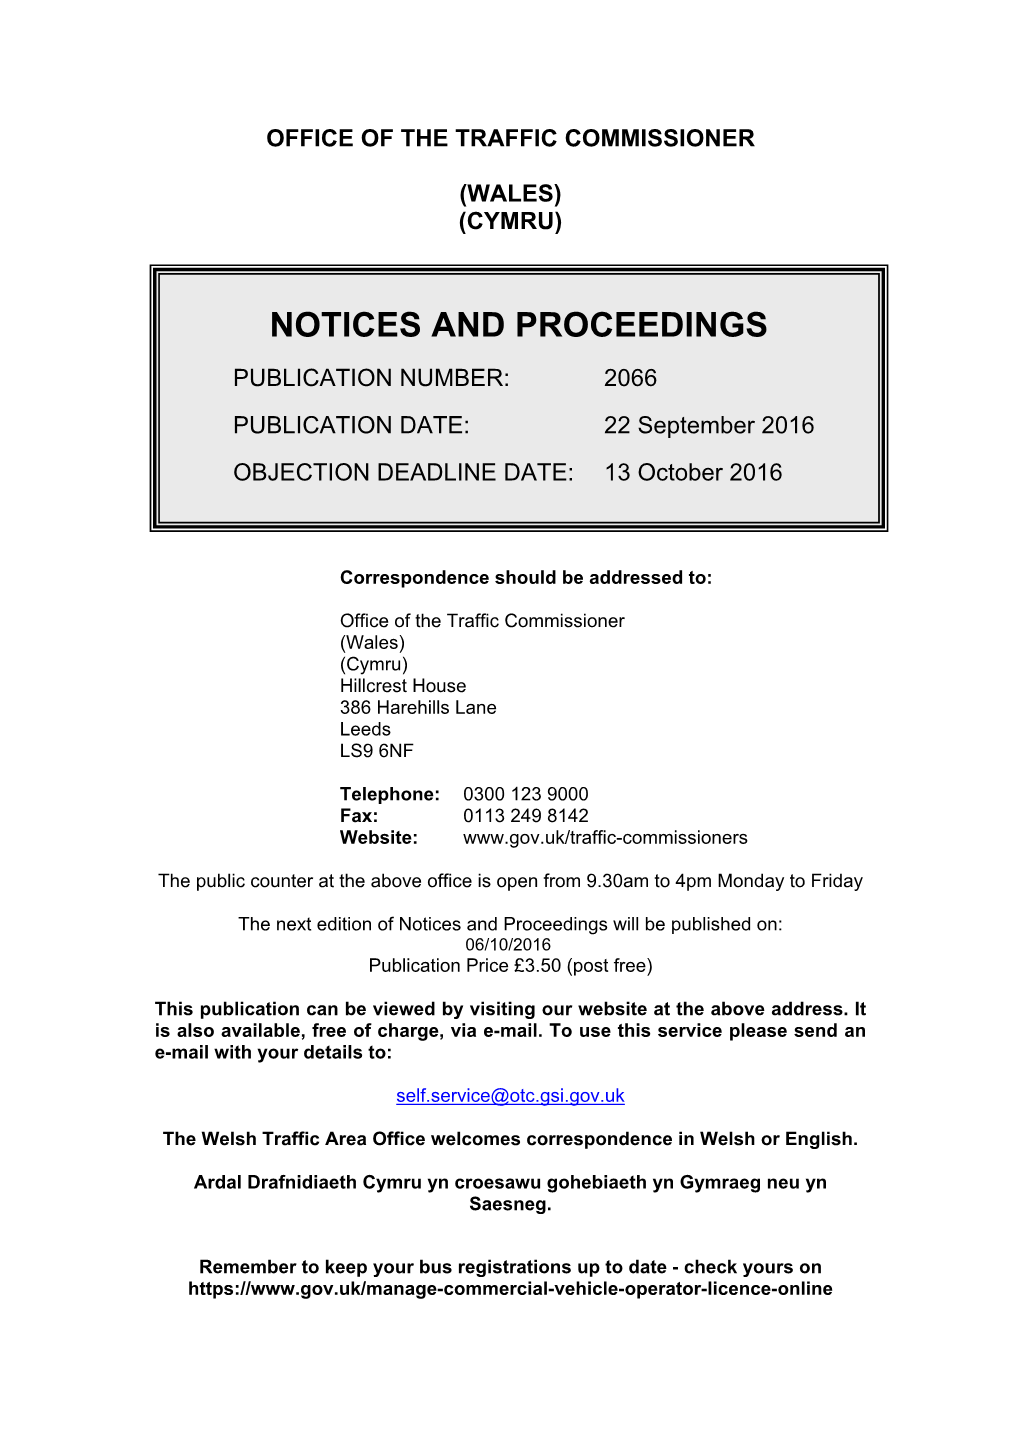 Notices and Proceedings: Wales: 22 September 2016